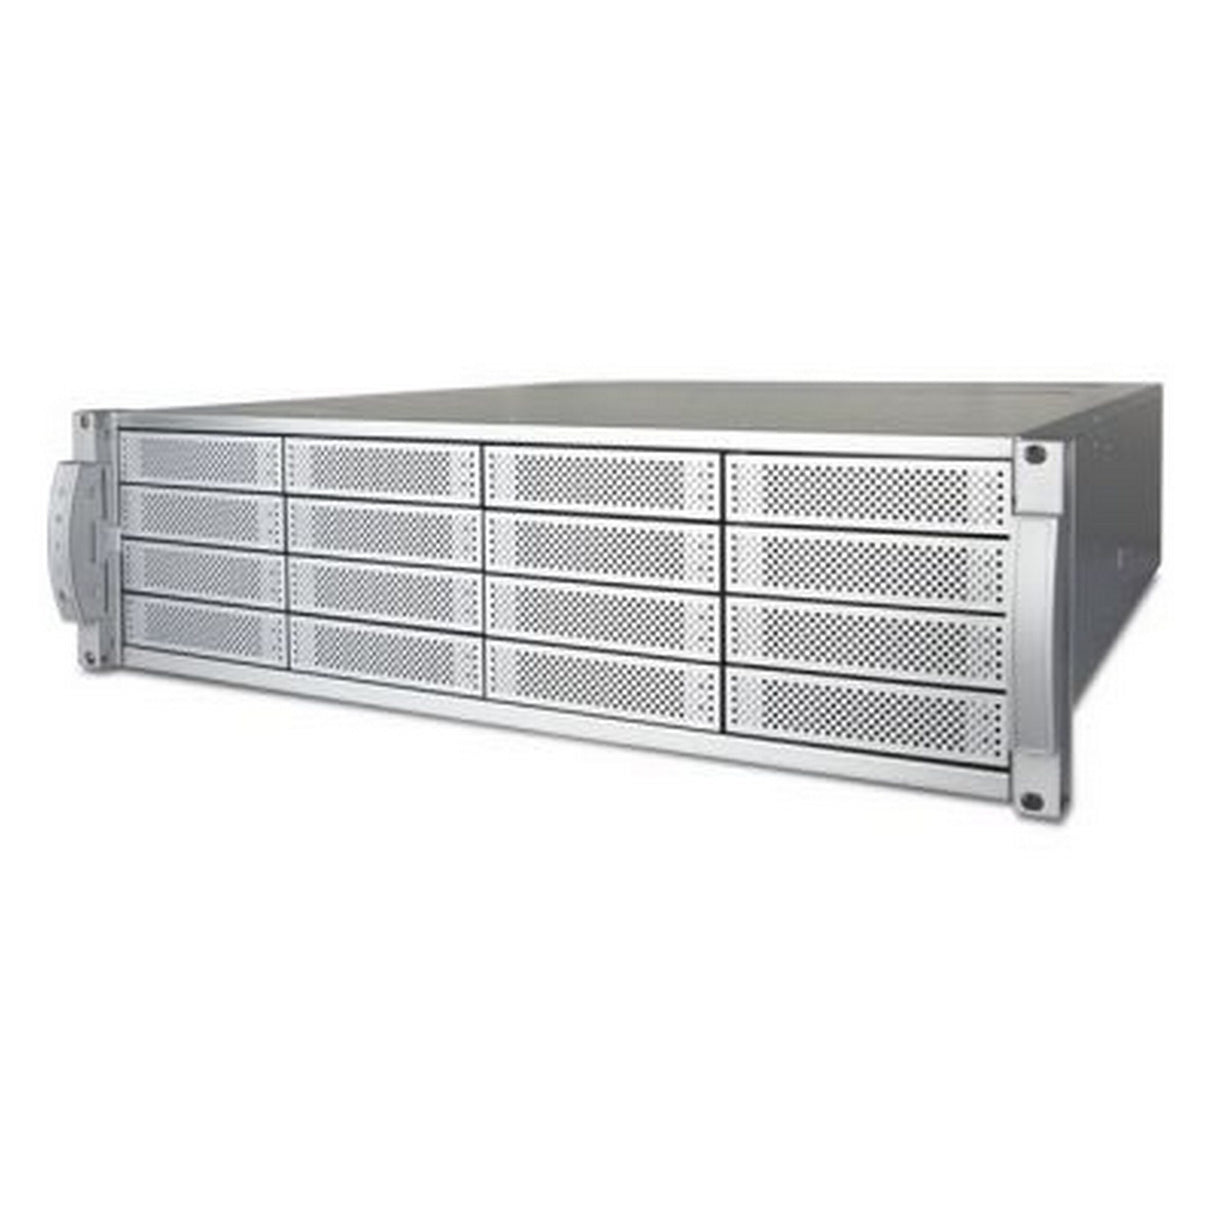 Accusys A16T3-Share 16-Bay Rackmount RAID System with Redundant Power Supply